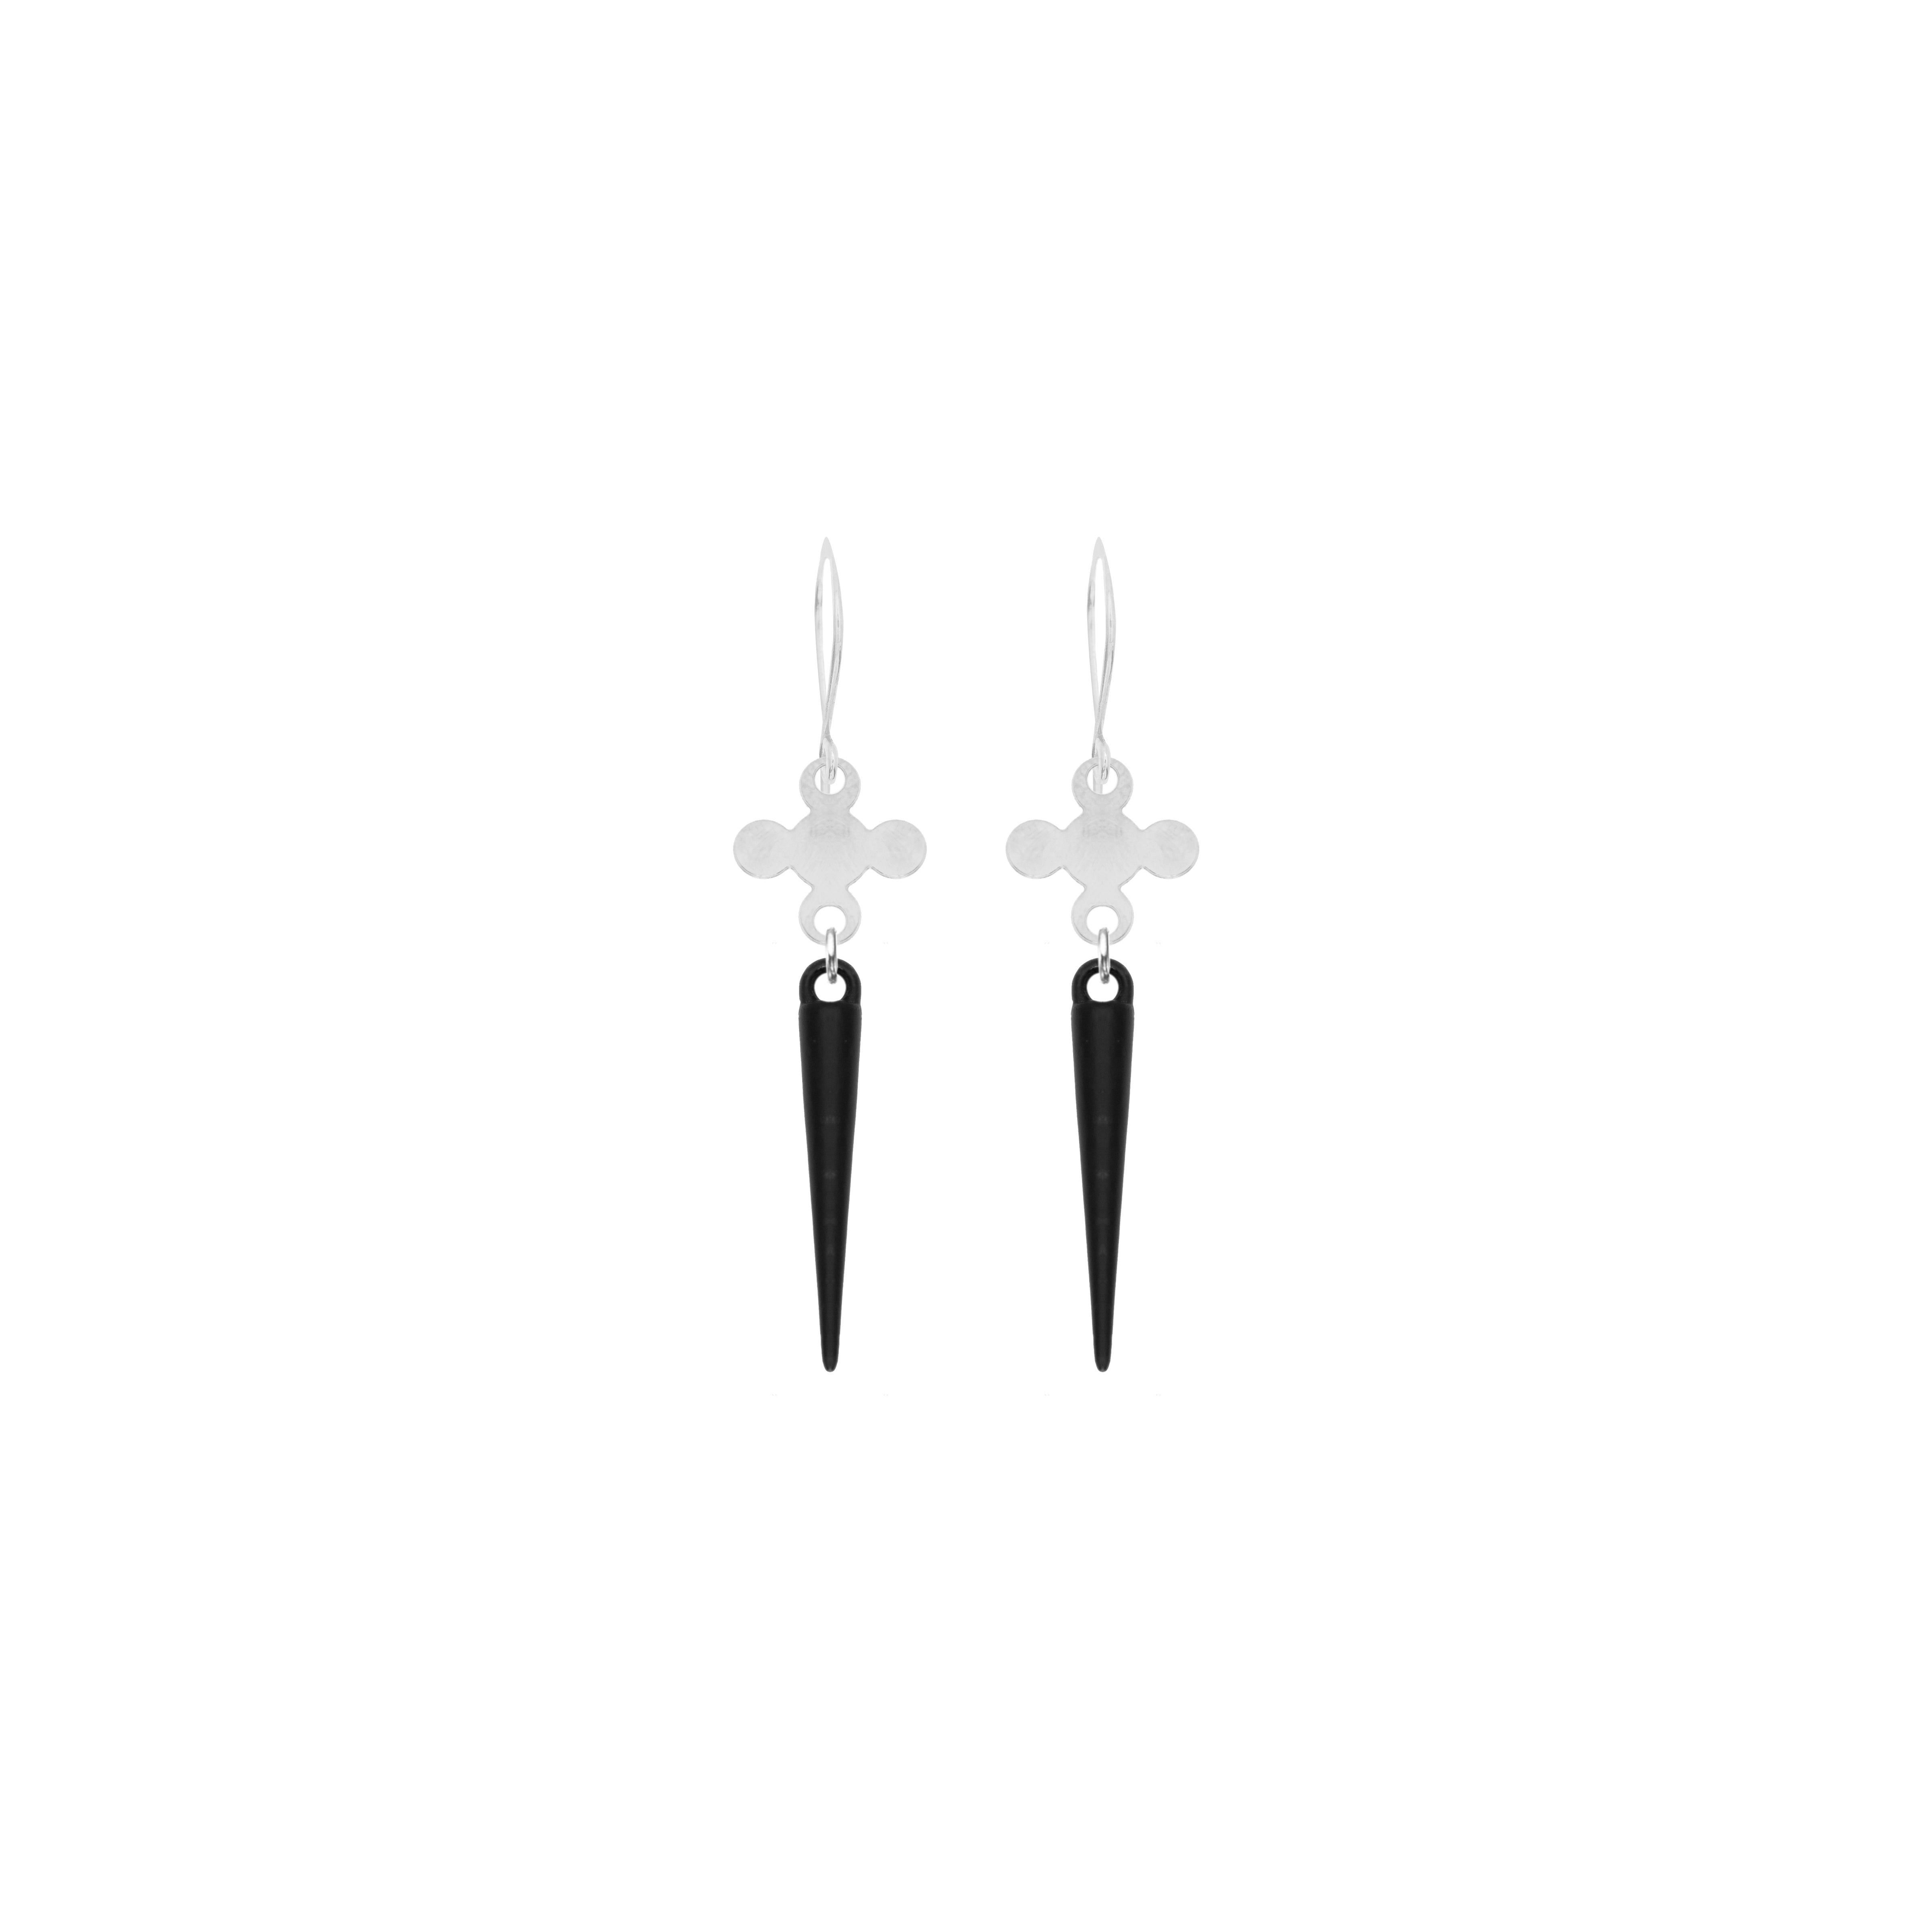 Mens Silver earrings with spikes